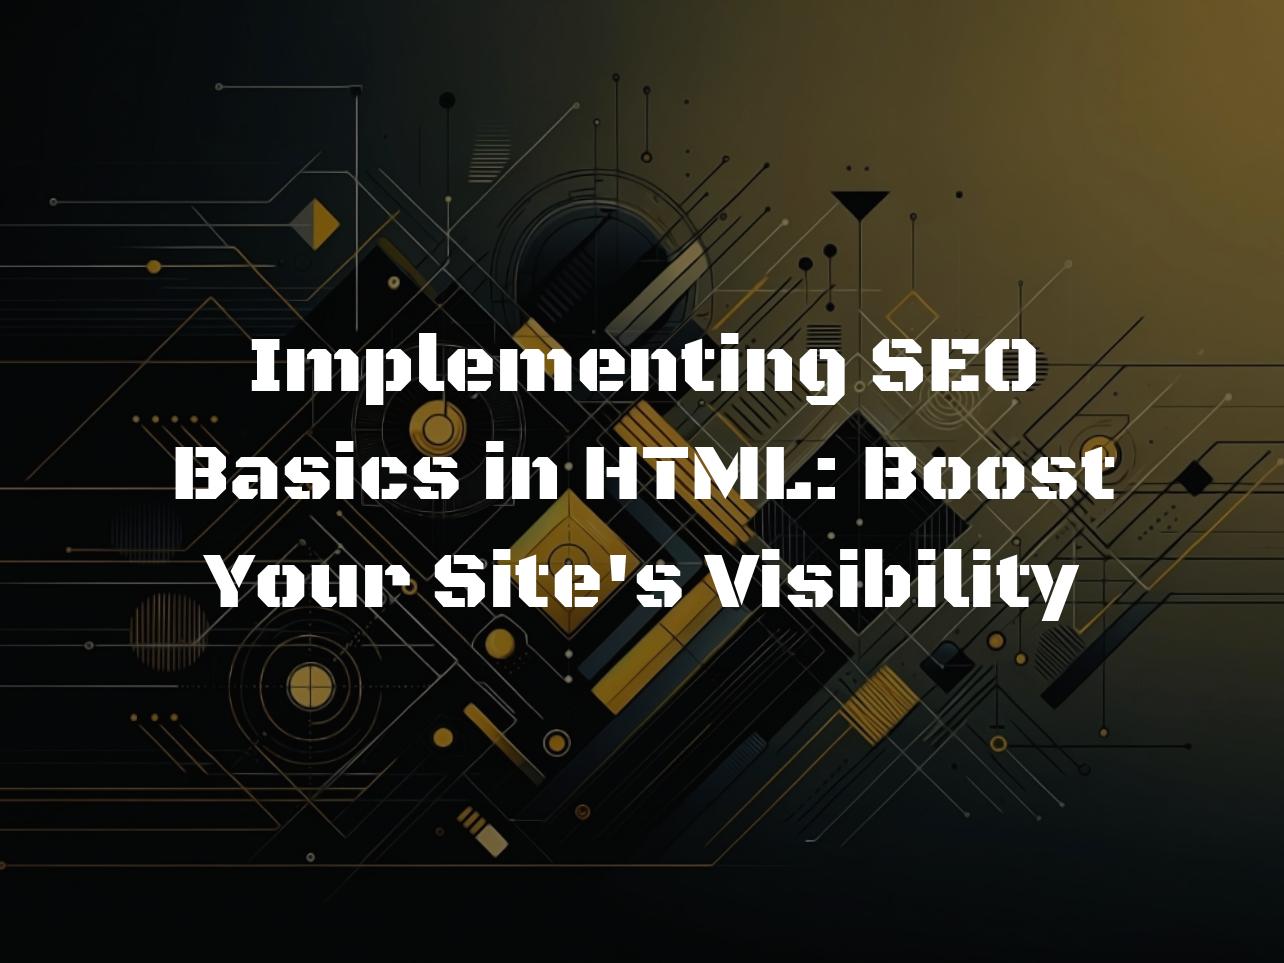 Implementing SEO Basics in HTML: Boost Your Site’s Visibility